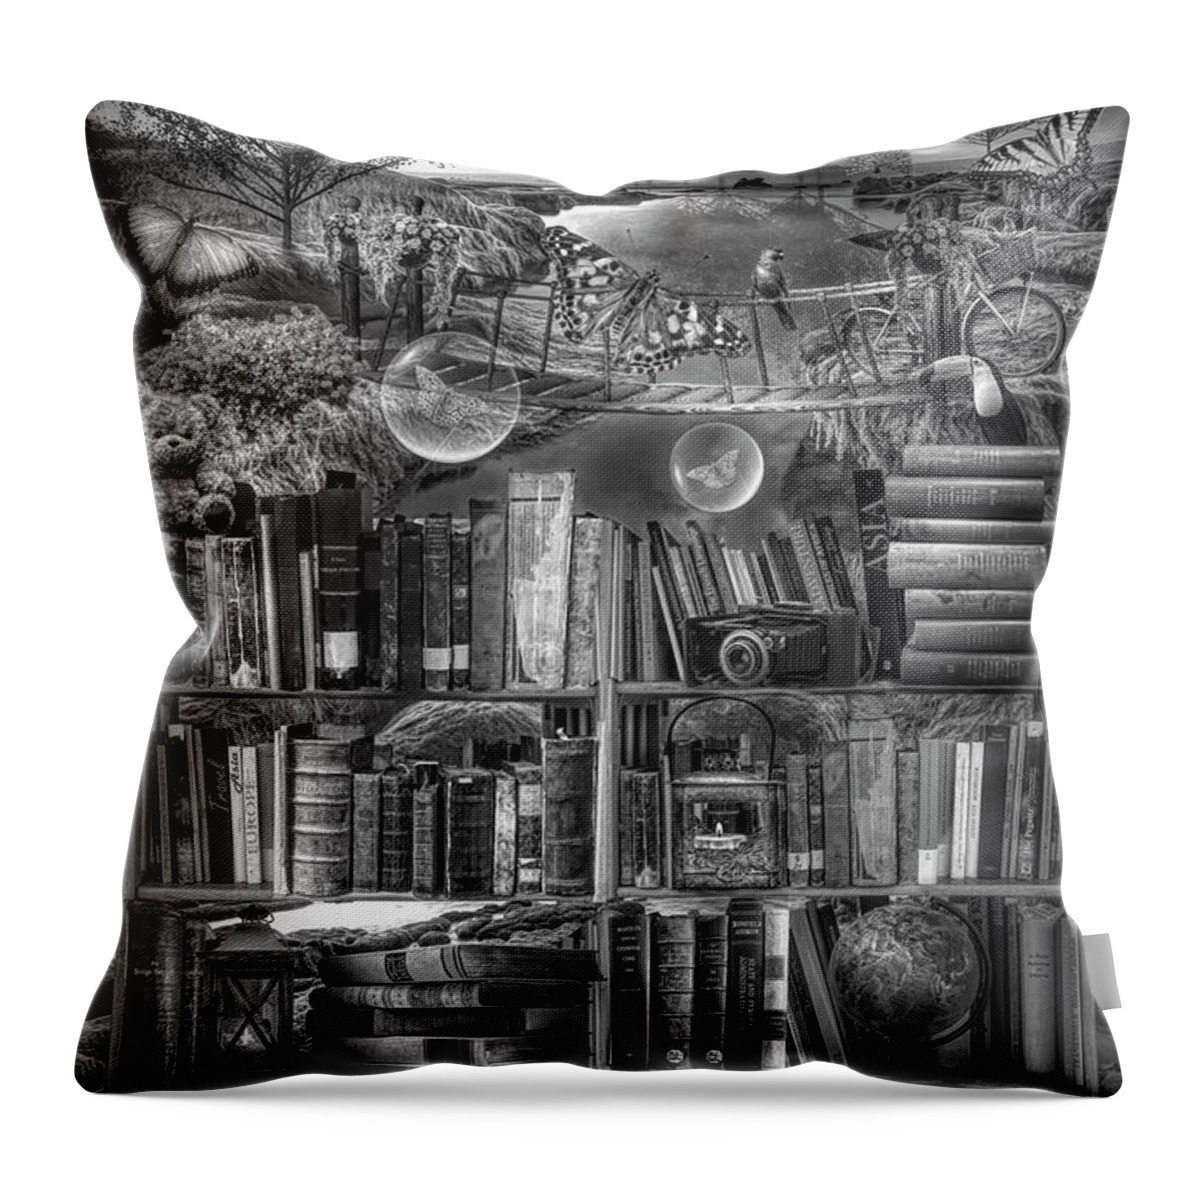 Birds Throw Pillow featuring the digital art Imagination through Reading Books in Black and White by Debra and Dave Vanderlaan